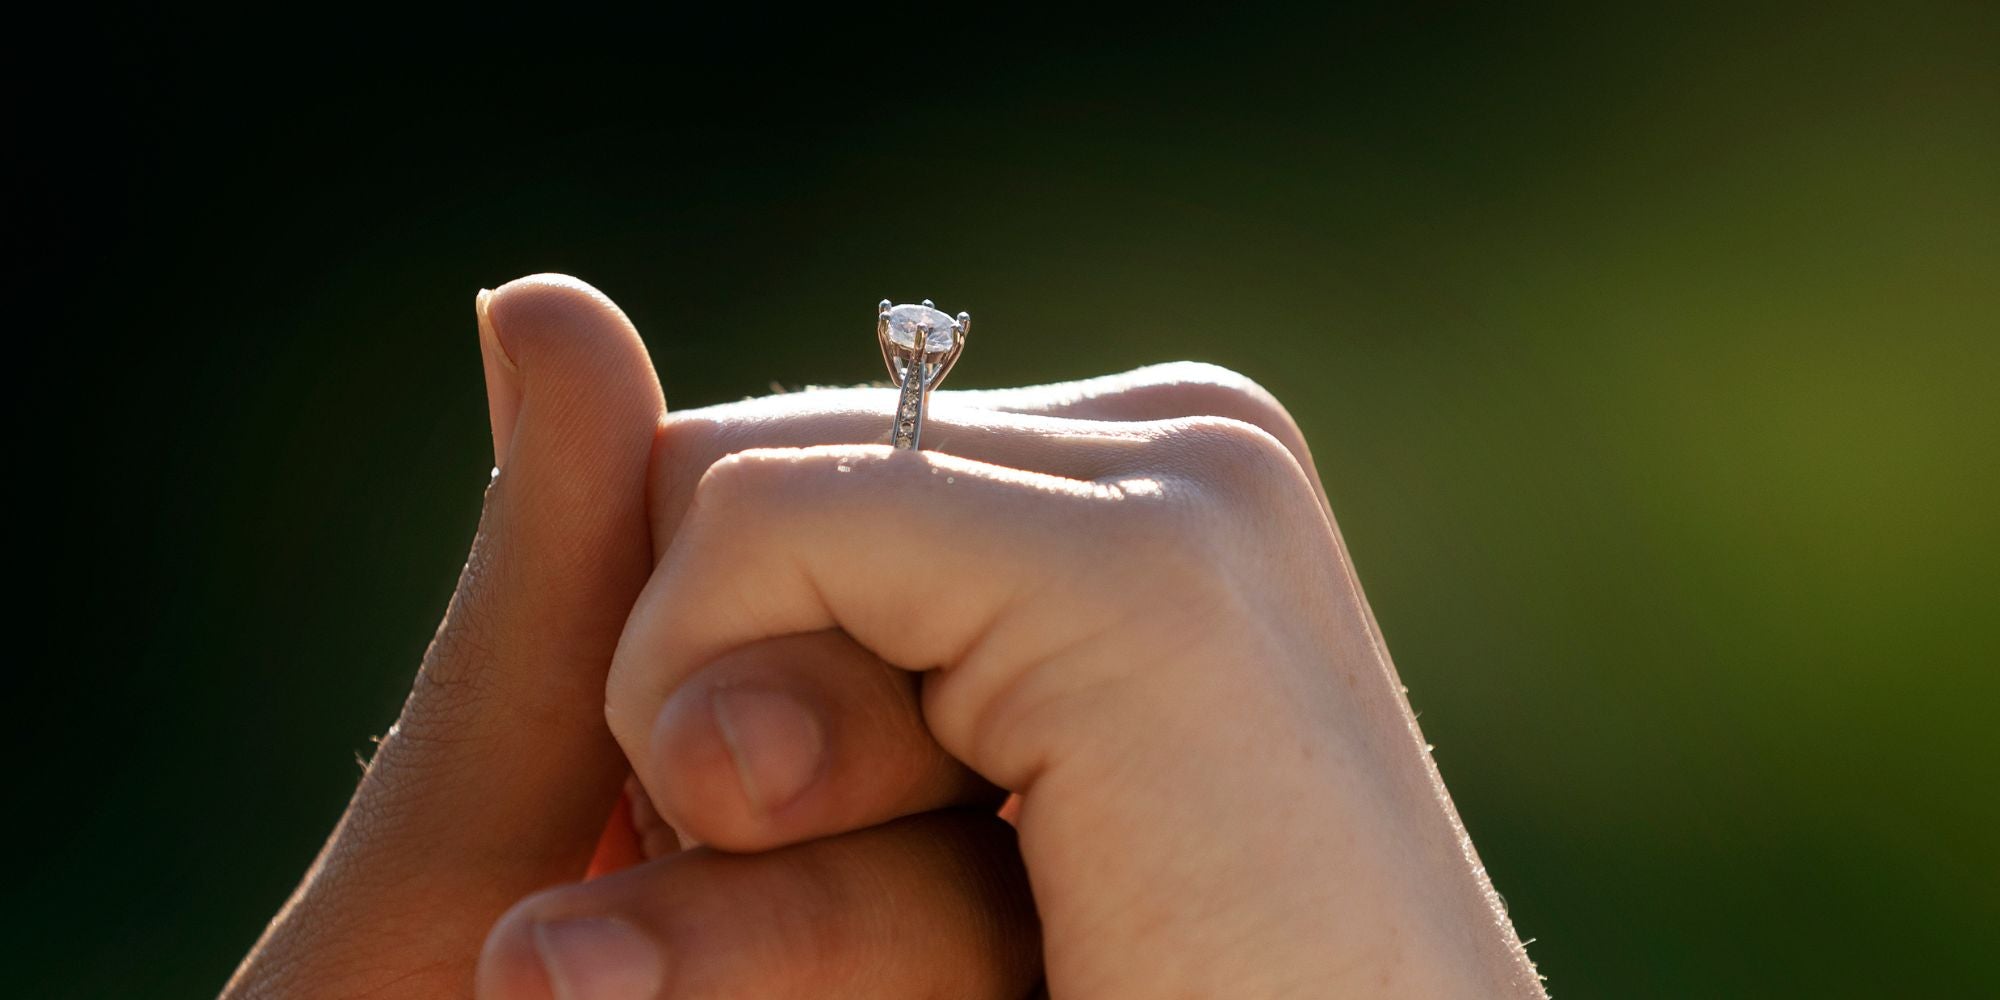 Eco-Friendly Weddings: Why More Couples Are Opting for Lab Grown Diamond Engagement Rings